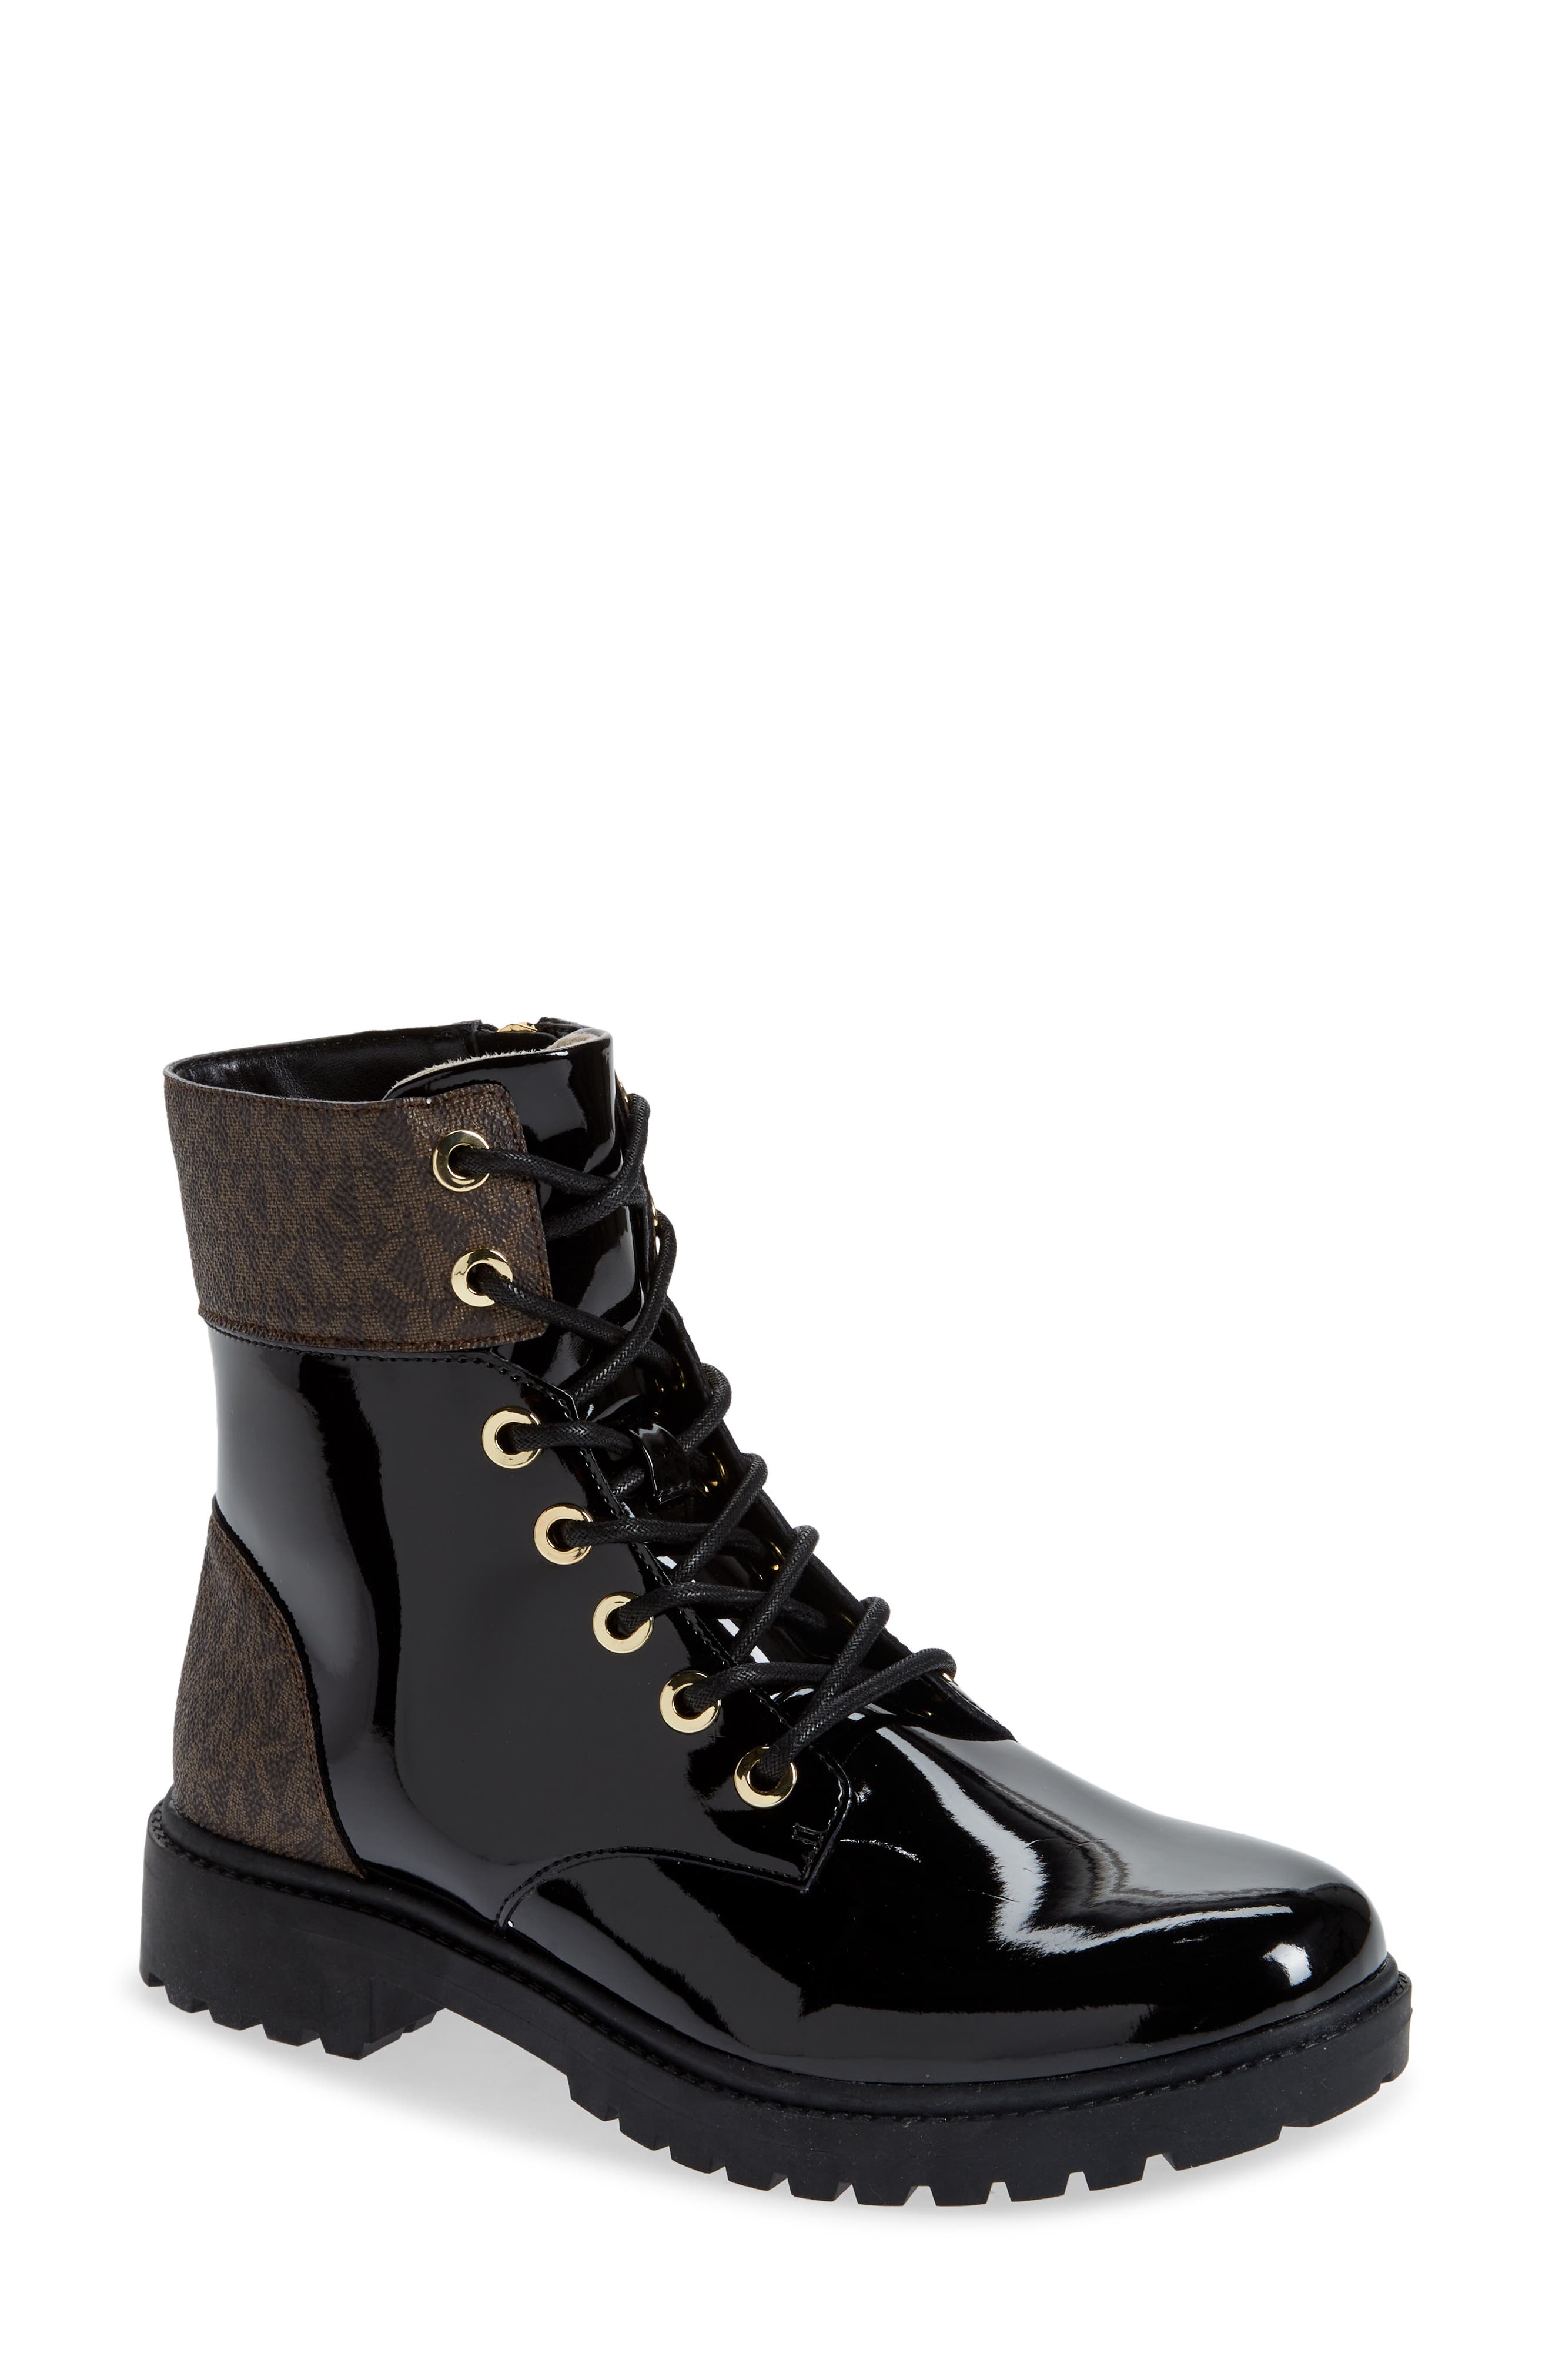 UPC 195512475597 product image for MICHAEL Michael Kors Alistair Lace-Up Boot in Black/Brown at Nordstrom, Size 10 | upcitemdb.com